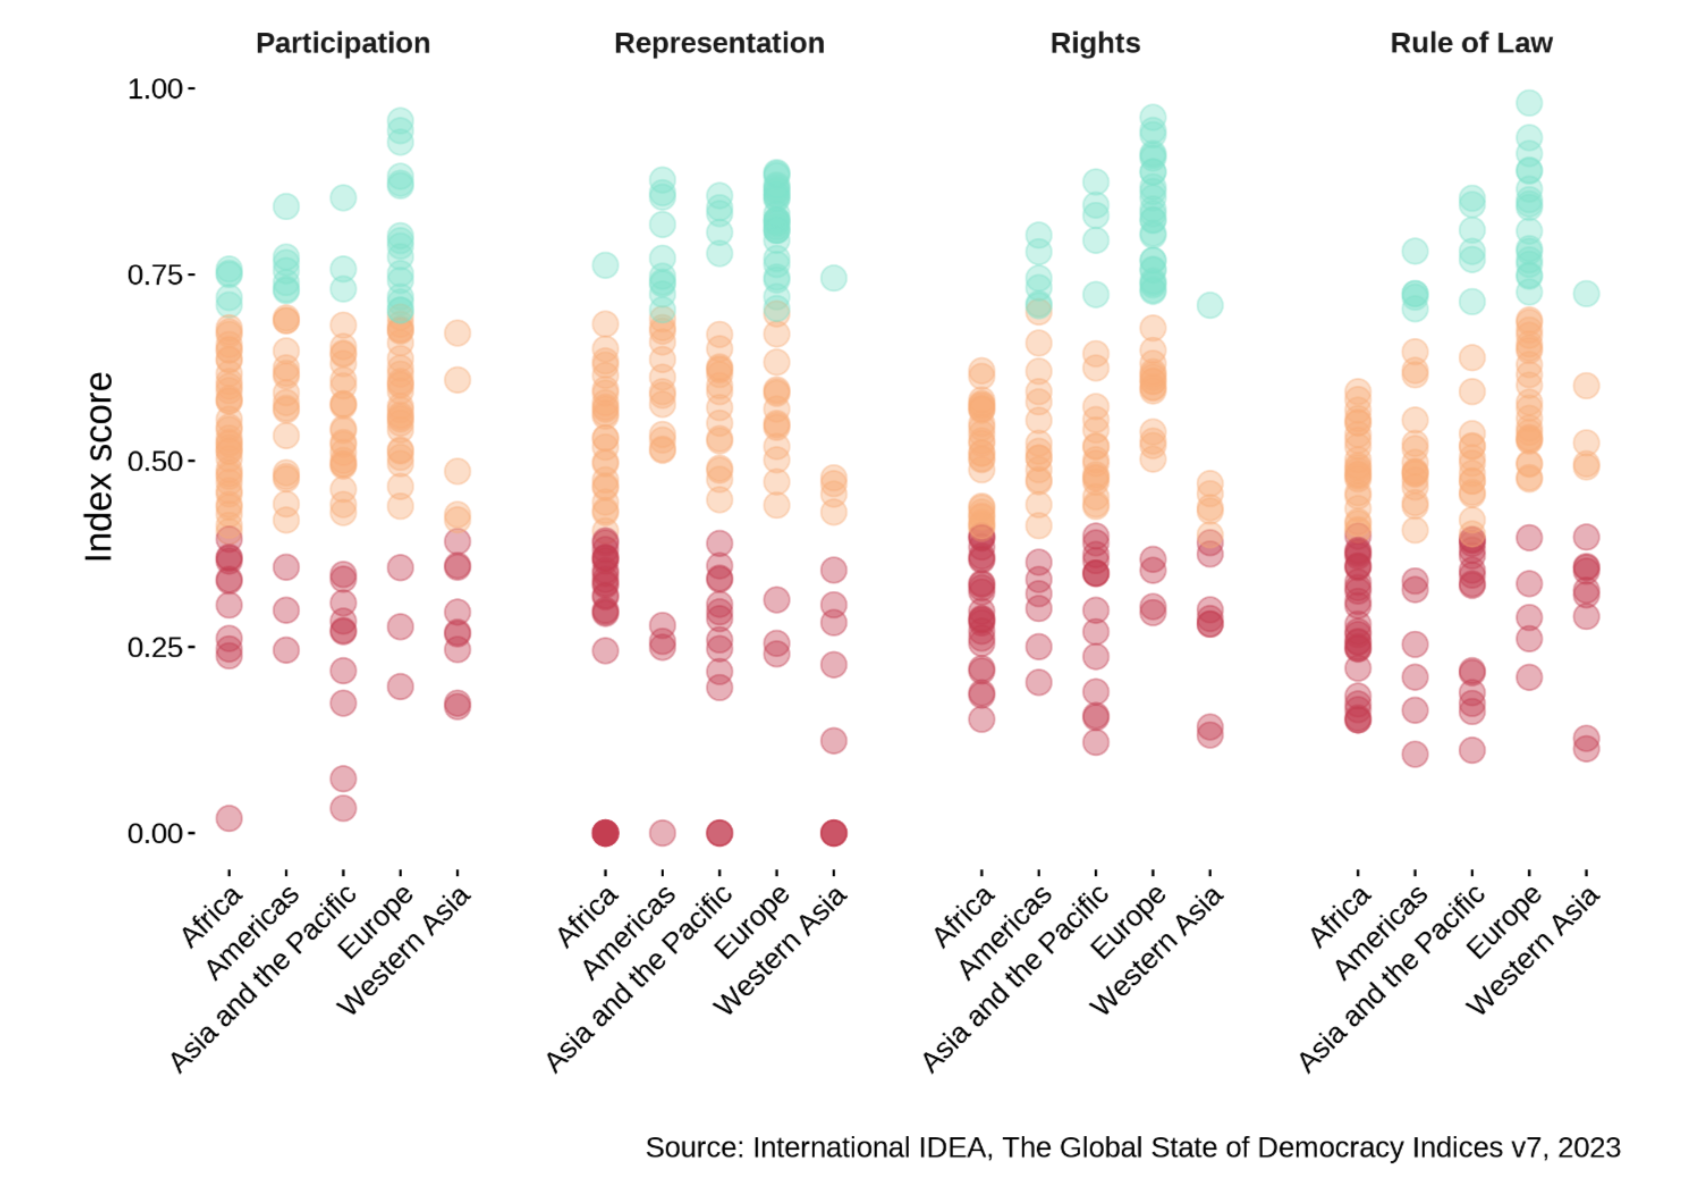 Global State of Democracy Indices categories